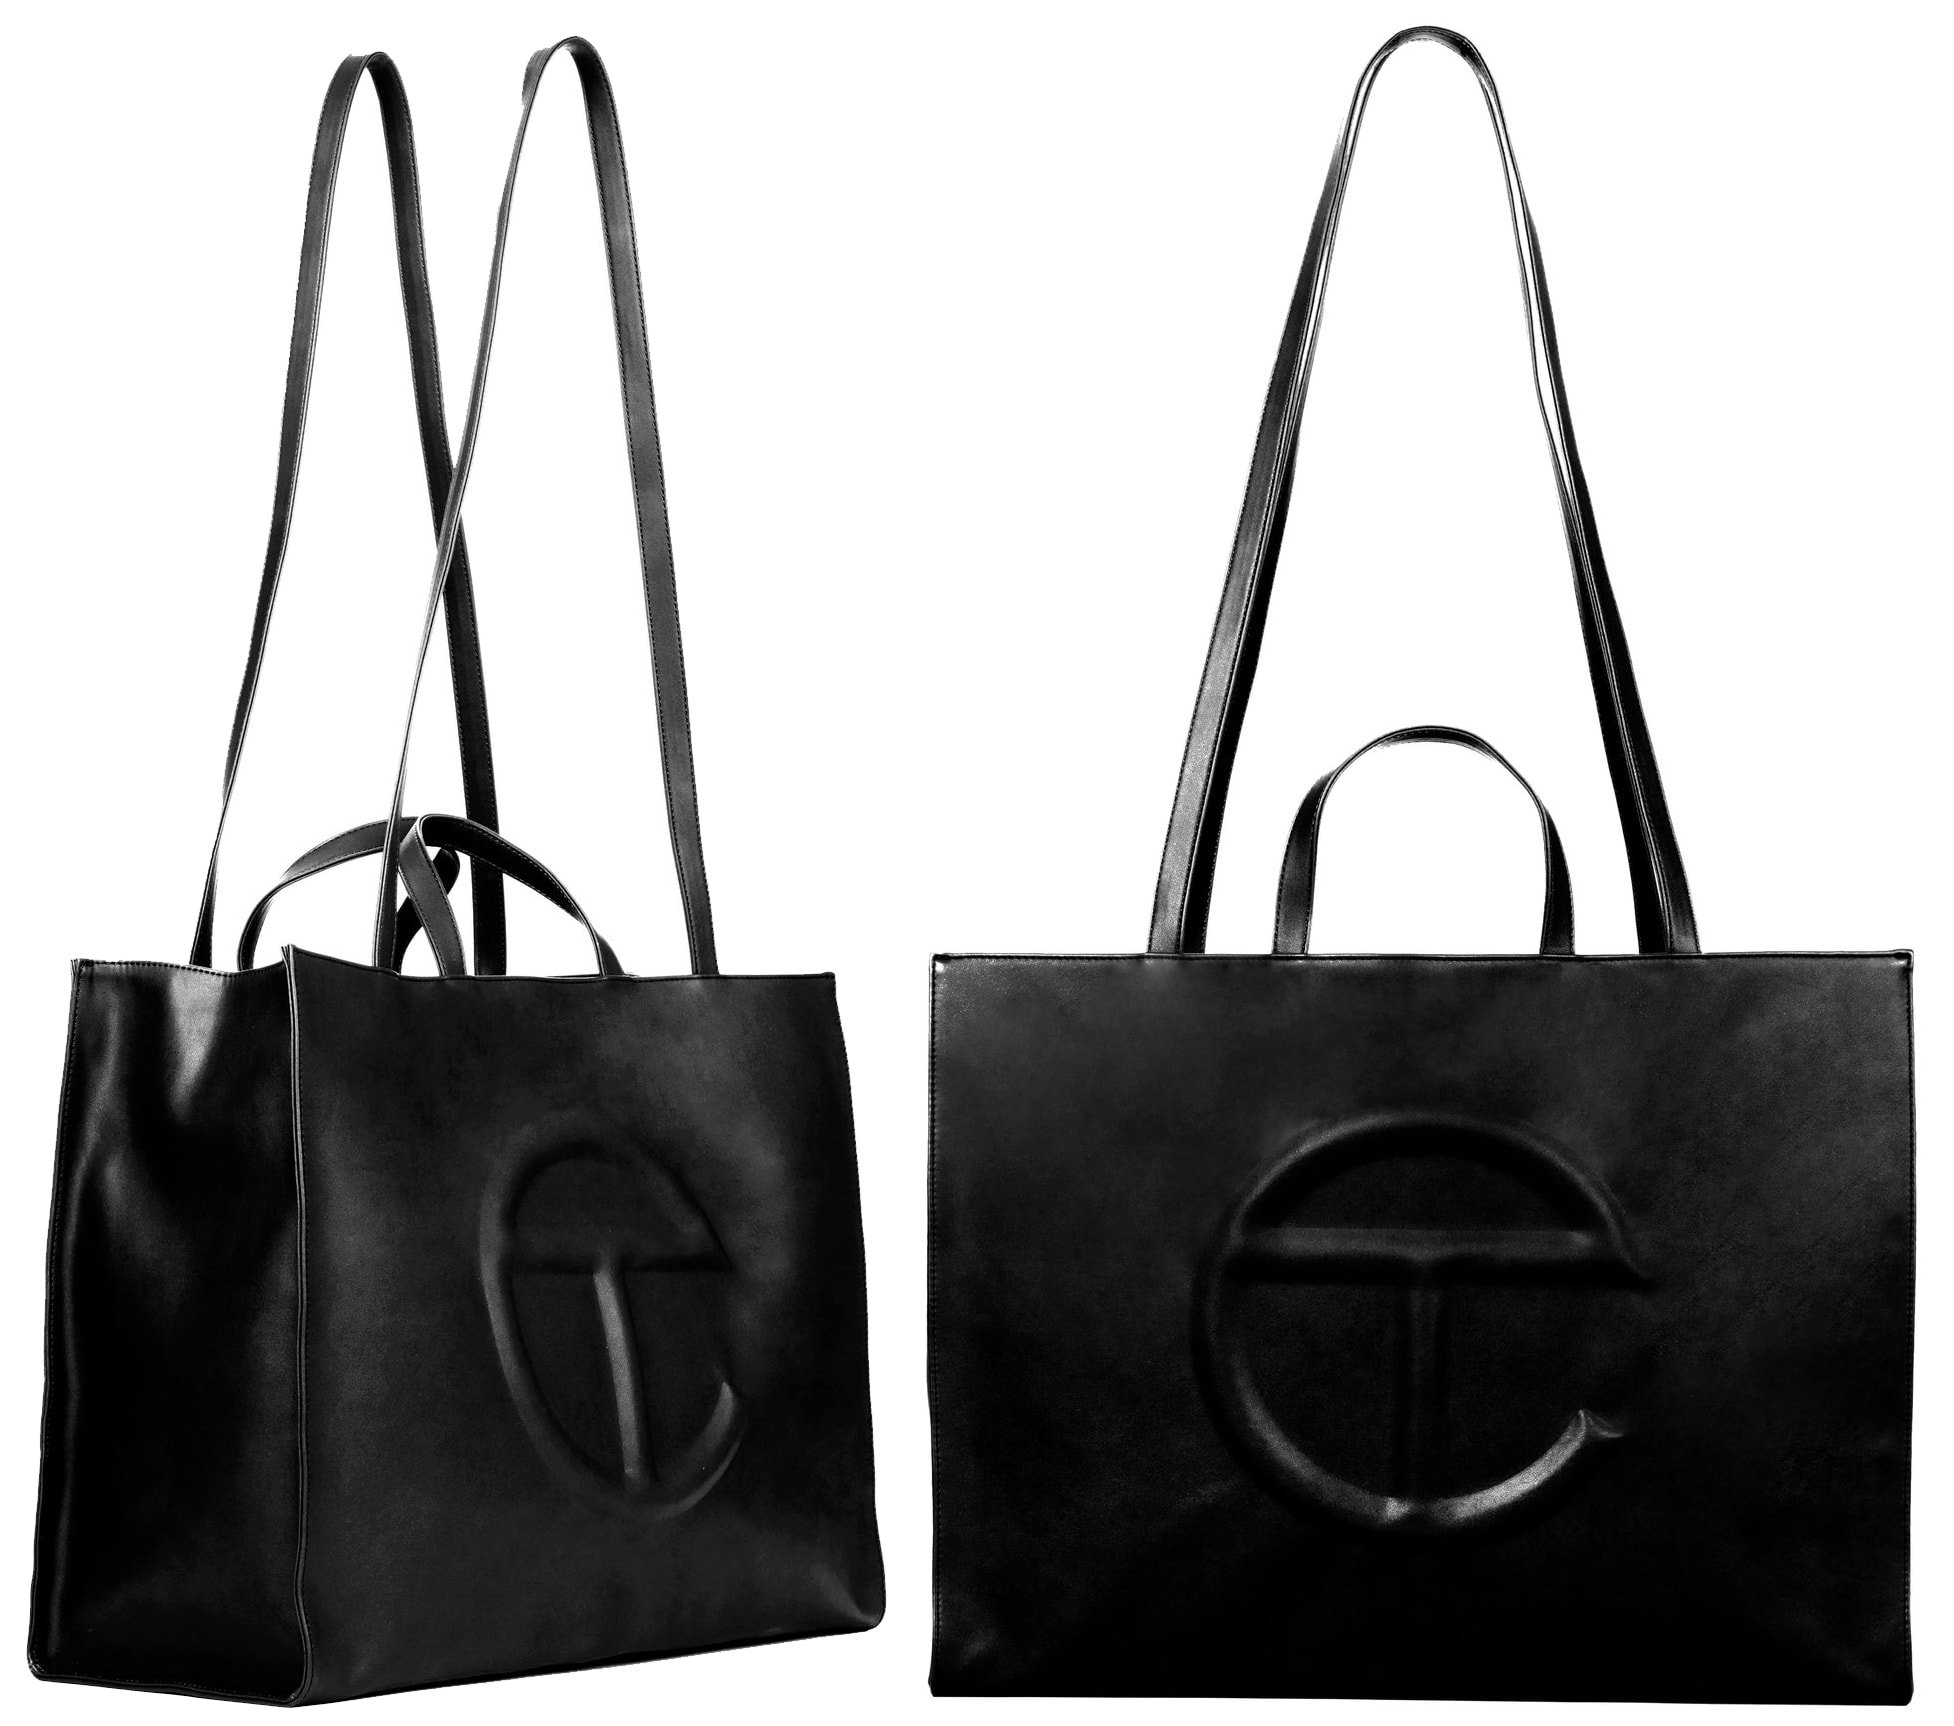 The staple large black shopping bag features a main compartment, an internal laptop-sized compartment, and an internal pocket